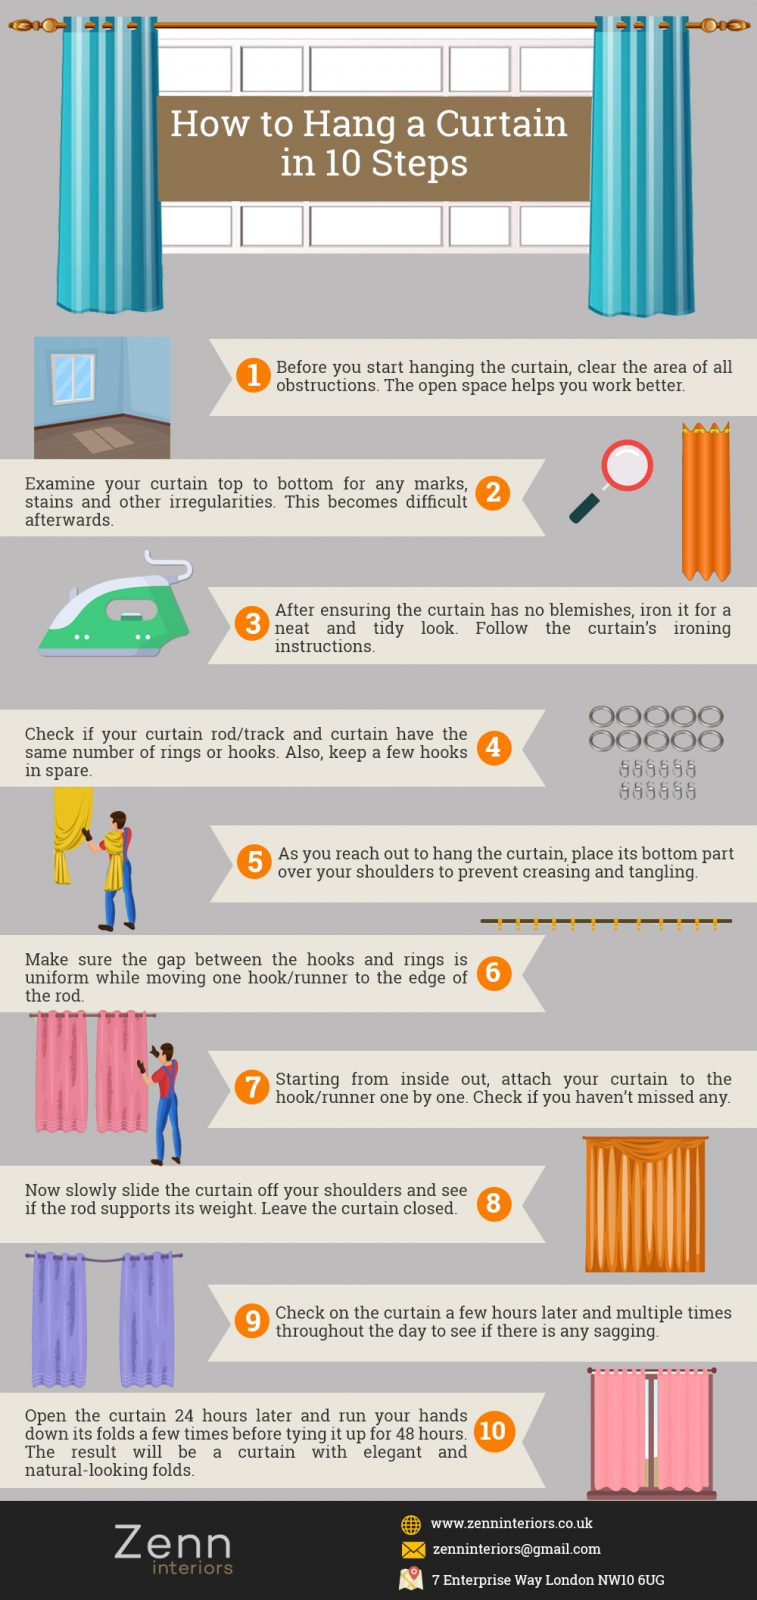 How to Hang a Curtain